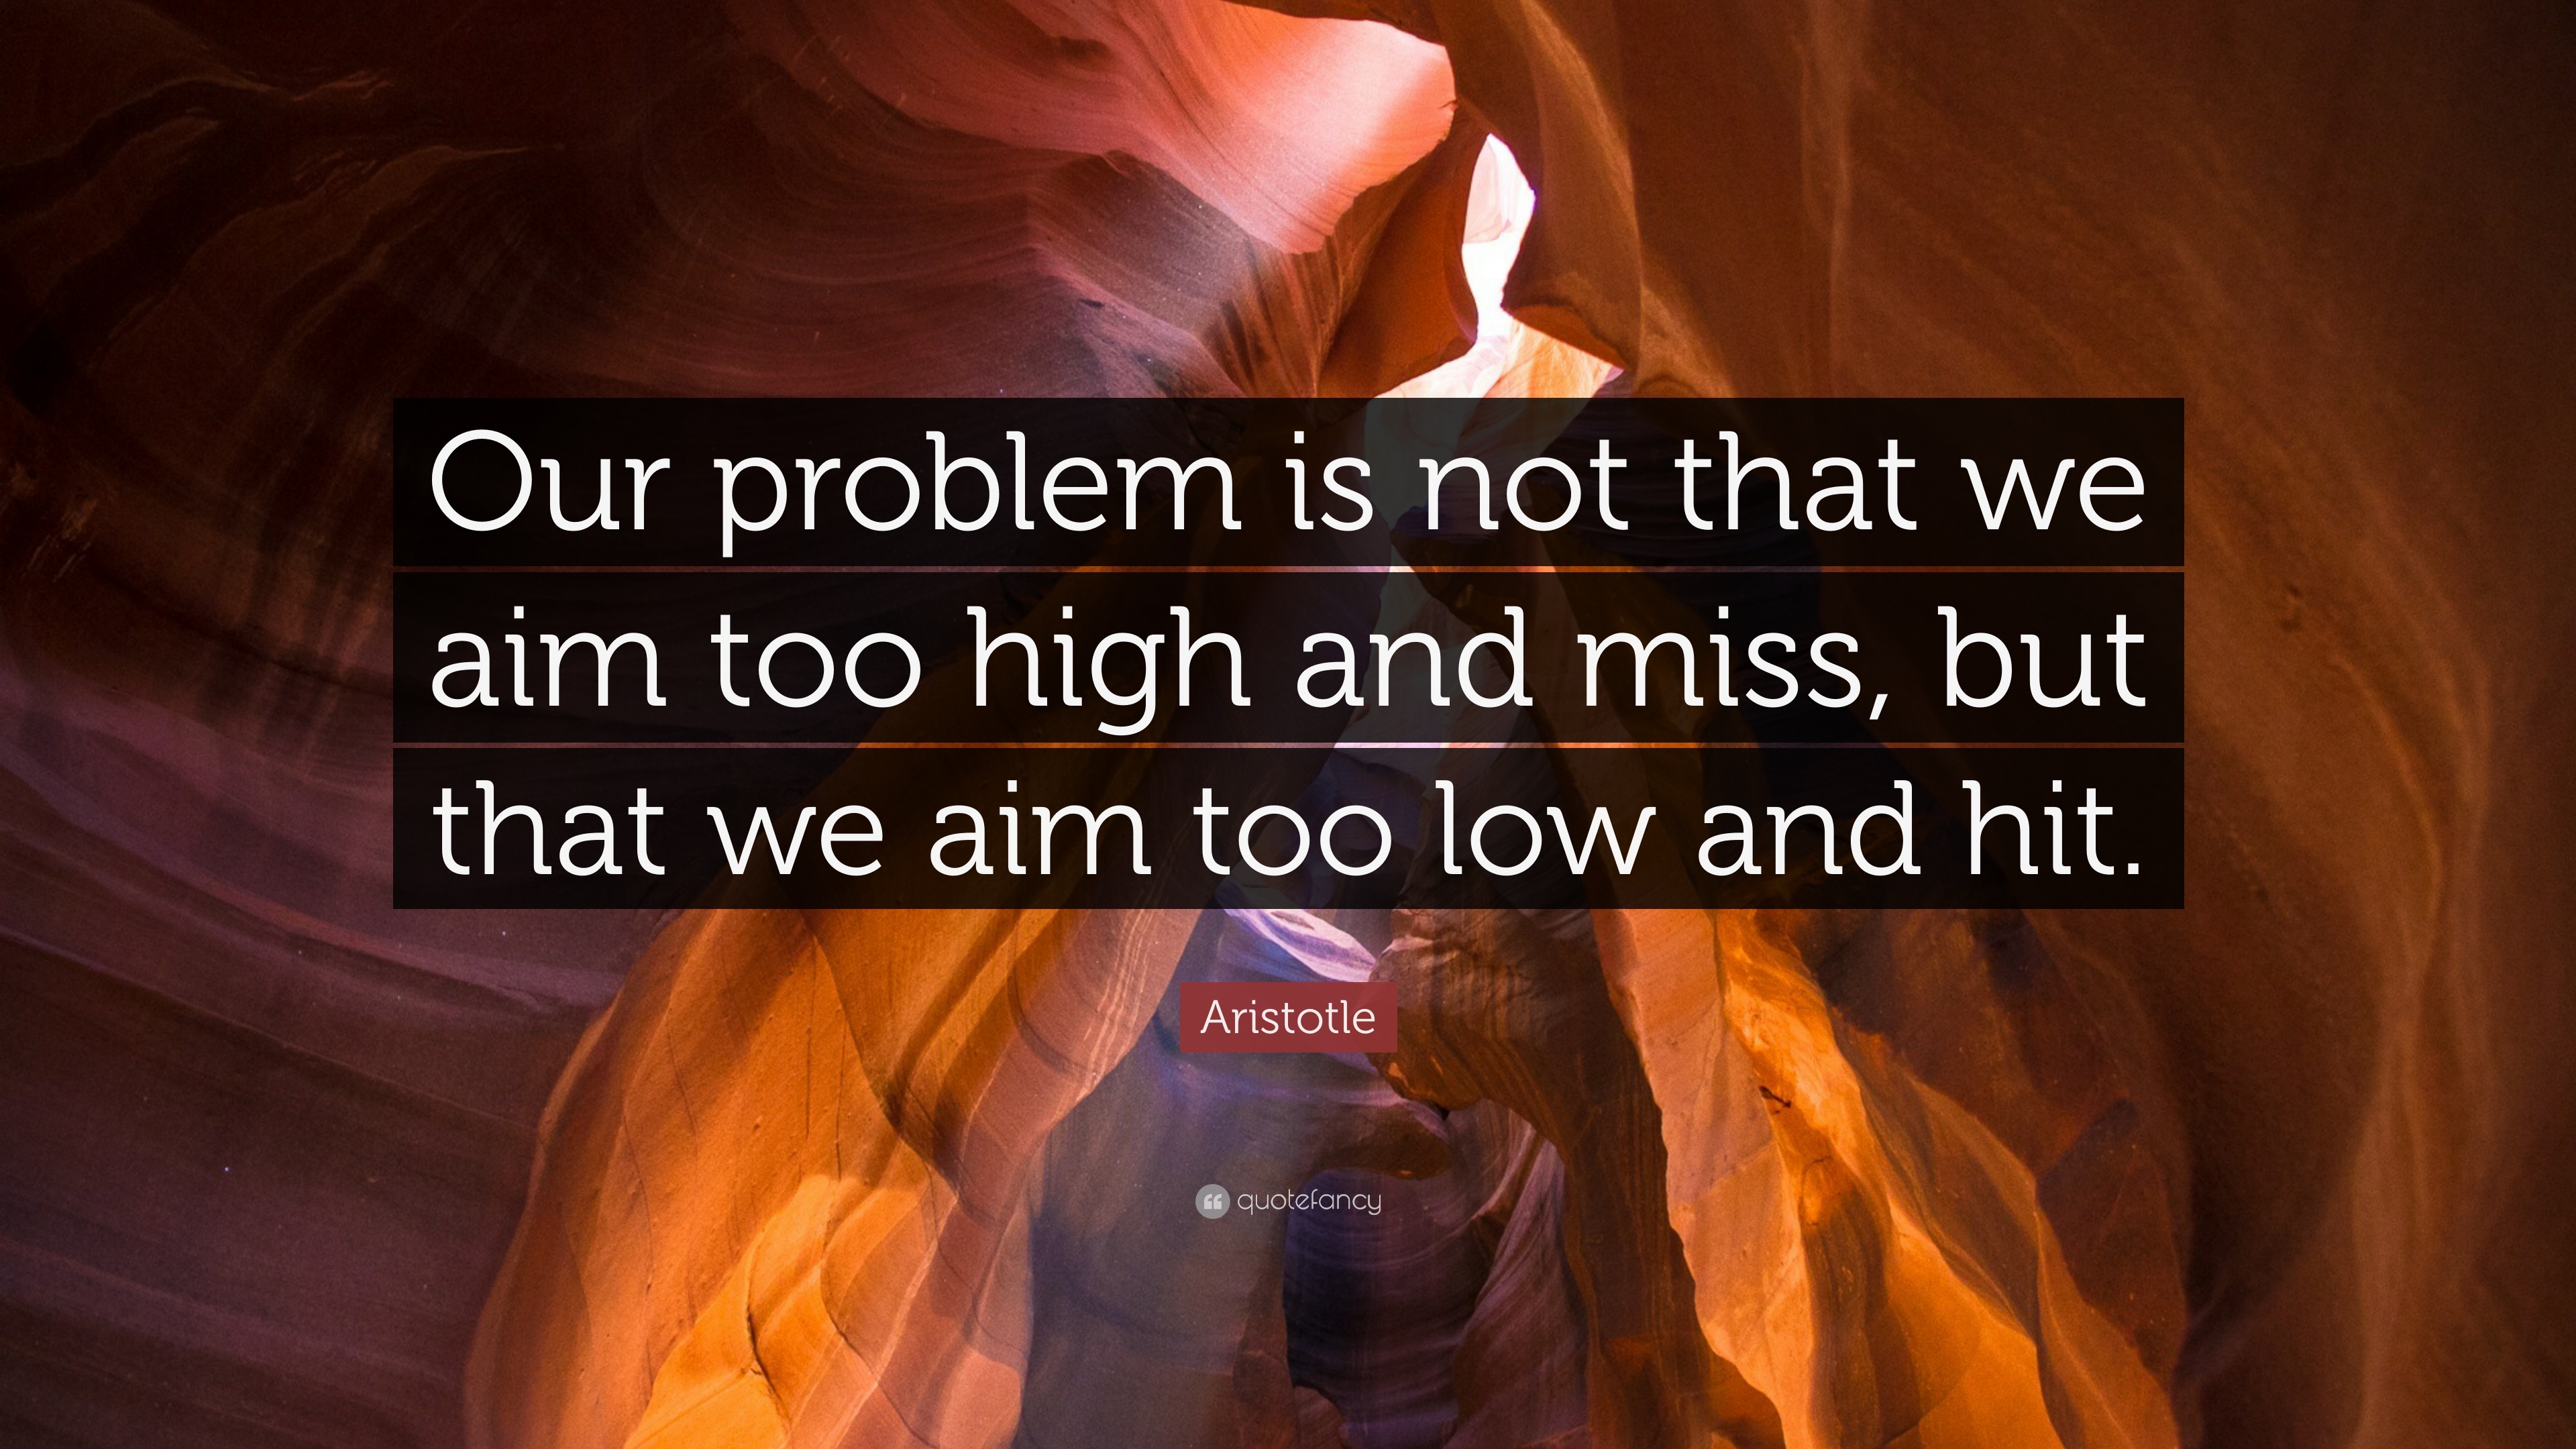 1735515-Aristotle-Quote-Our-problem-is-not-that-we-aim-too-high-and-miss.jpg